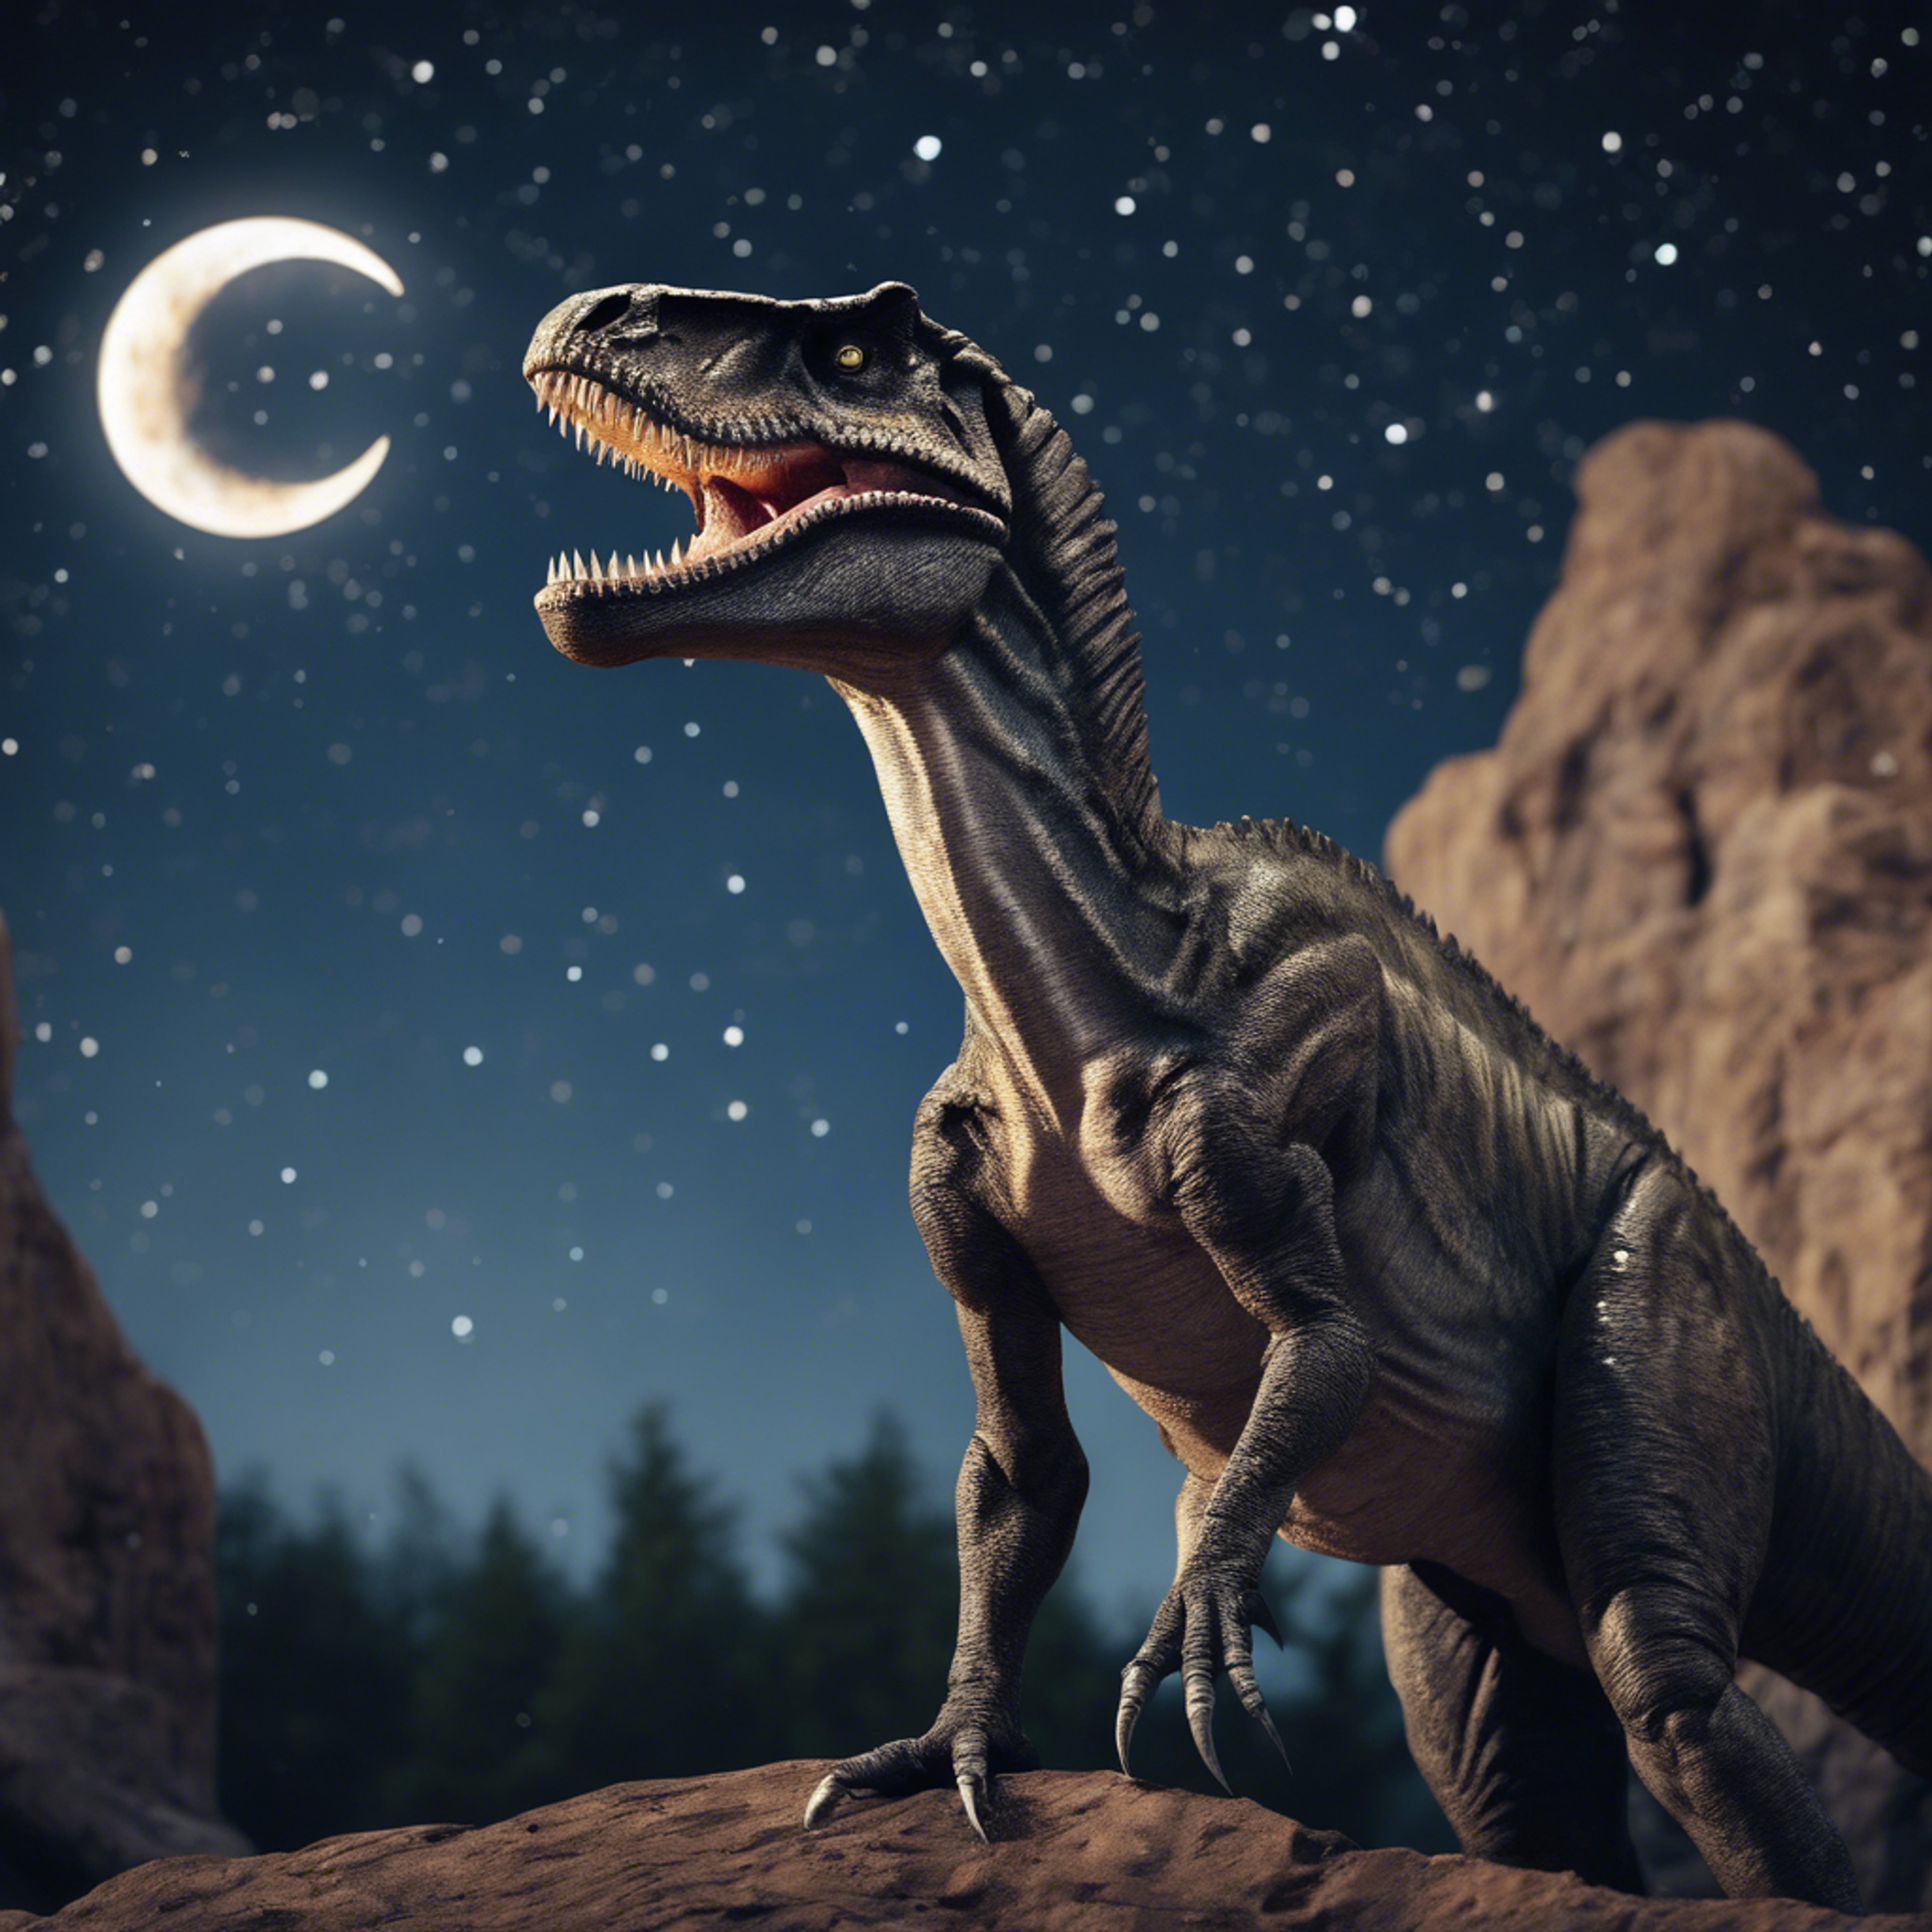 An Allosaurus under the bright starry night sky, howling at the crescent moon delicately. کاغذ دیواری[f8d2841798534275b963]